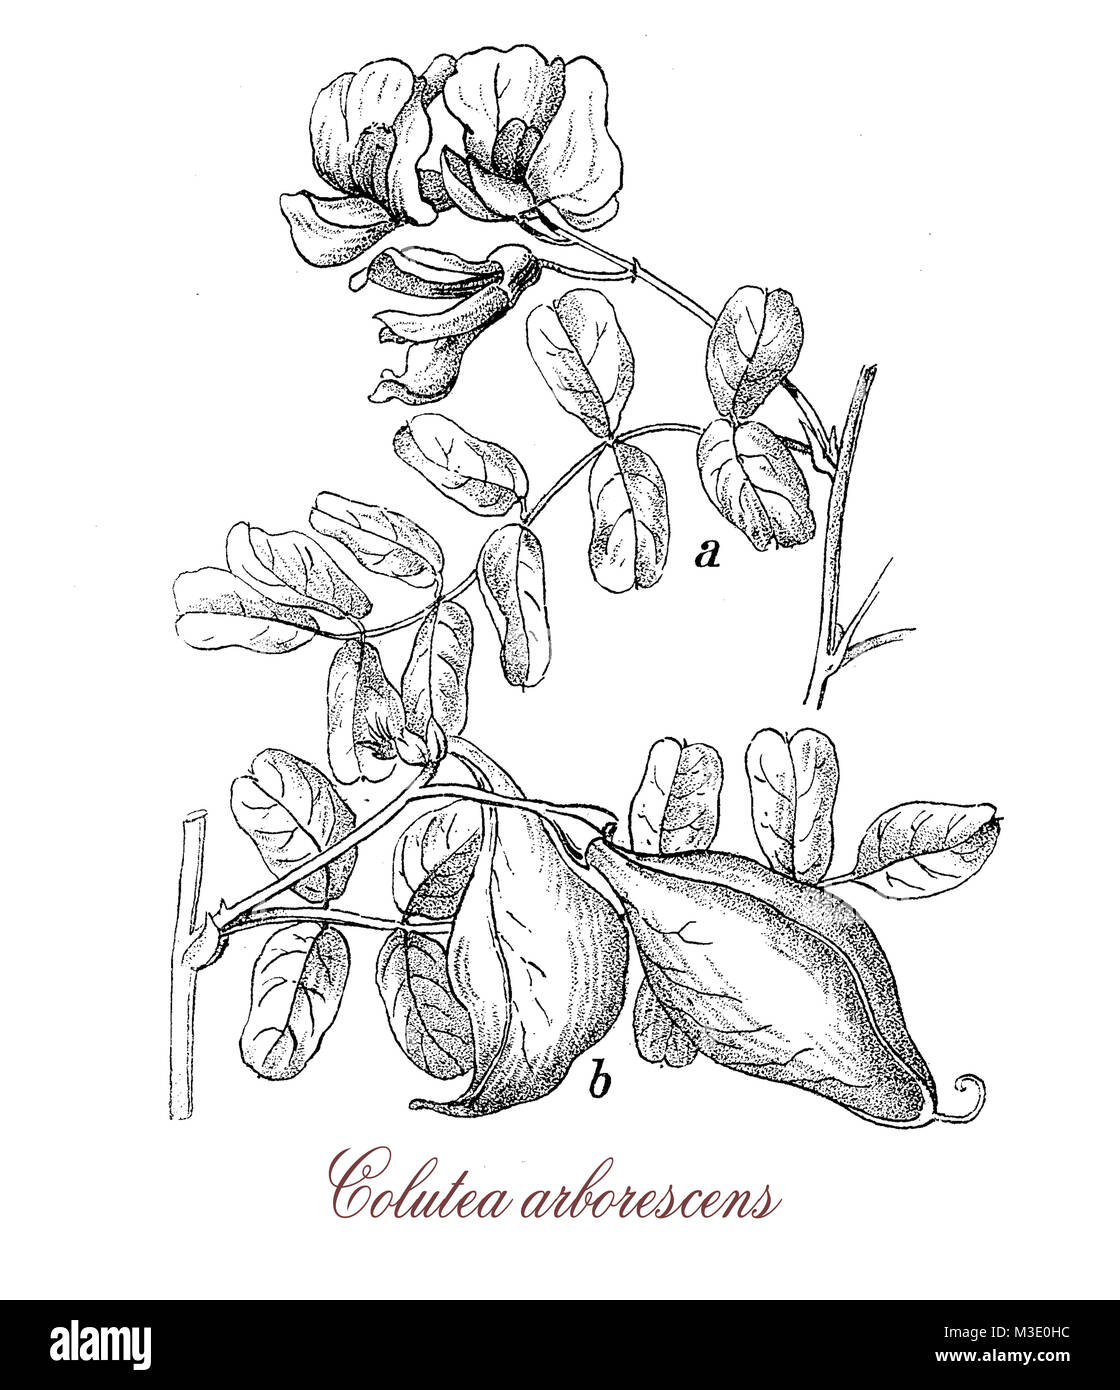 vintage engraving of colutea arborescens, shrub with pea-like flowers used in landscaping against erosion in dry soils Stock Photo